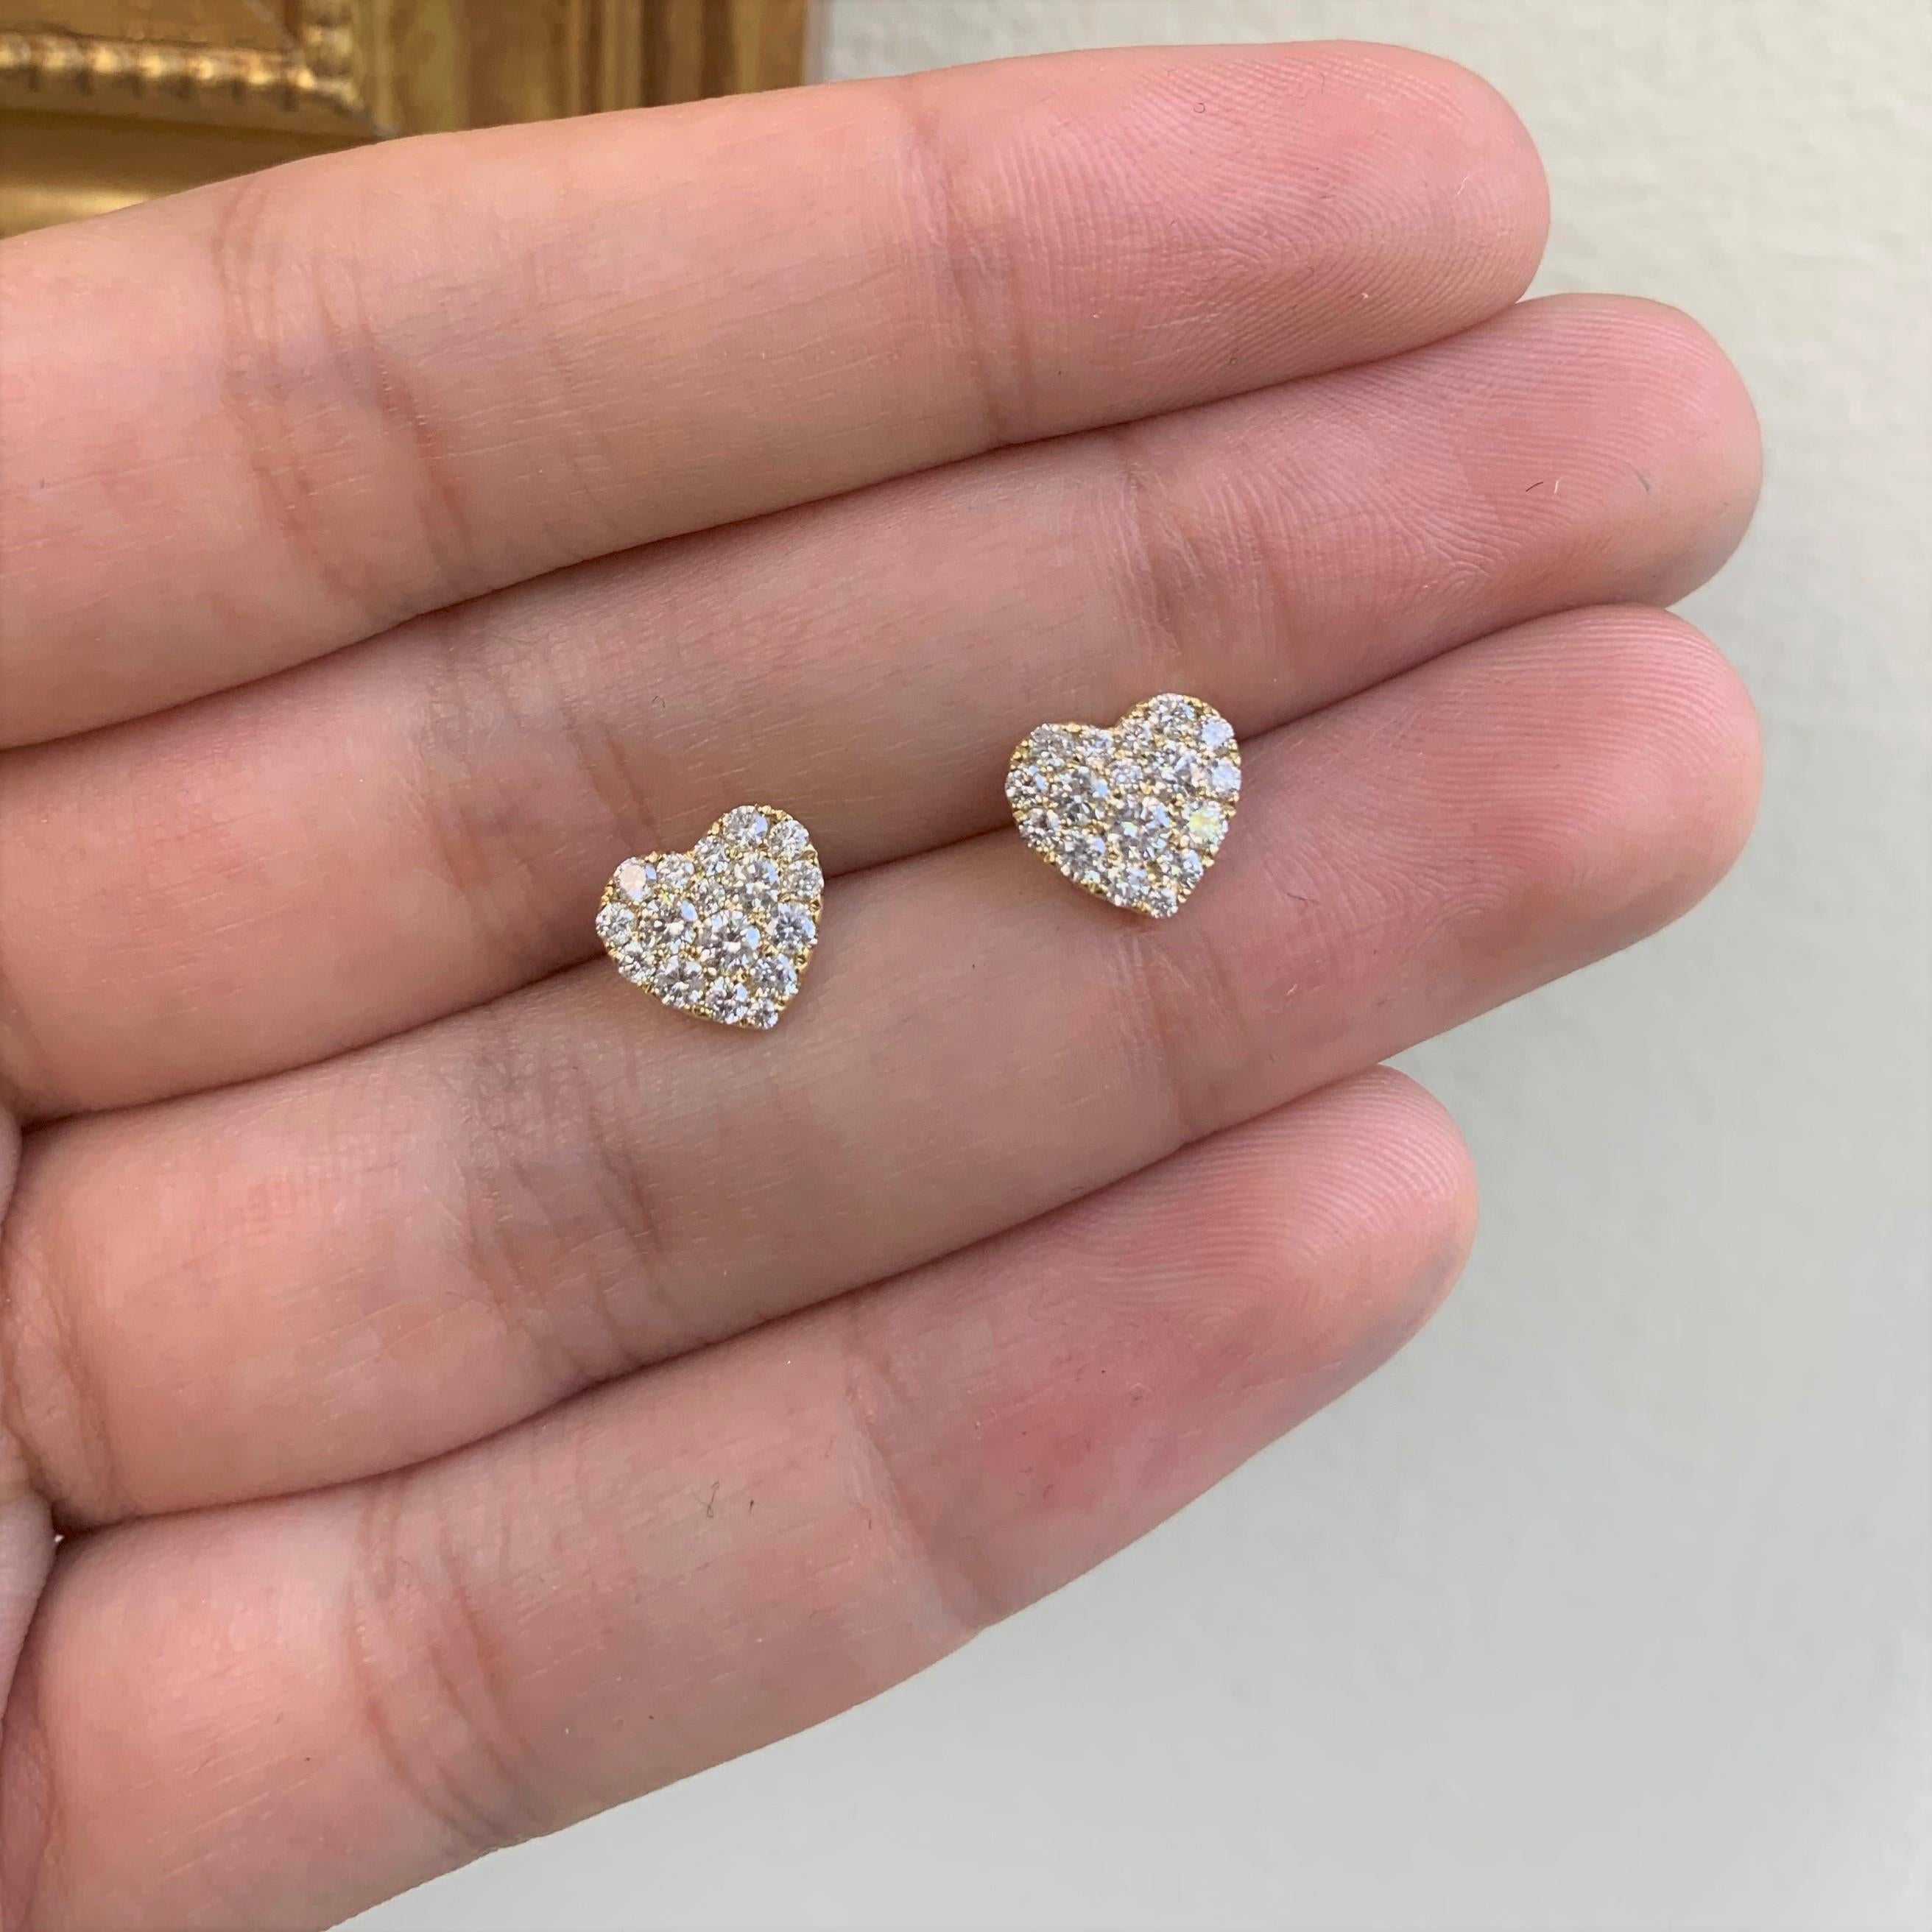 These Pretty and Chic Heart Stud Earrings are crafted of 14K Gold featuring approximately 0.70 cts of round Diamonds, Color & Clarity is GH-SI1. Secured with Butterfly push backs.
-Diamond Weight: 0.70 ct.
-Diamond Clarity: SI
-Diamond Color: